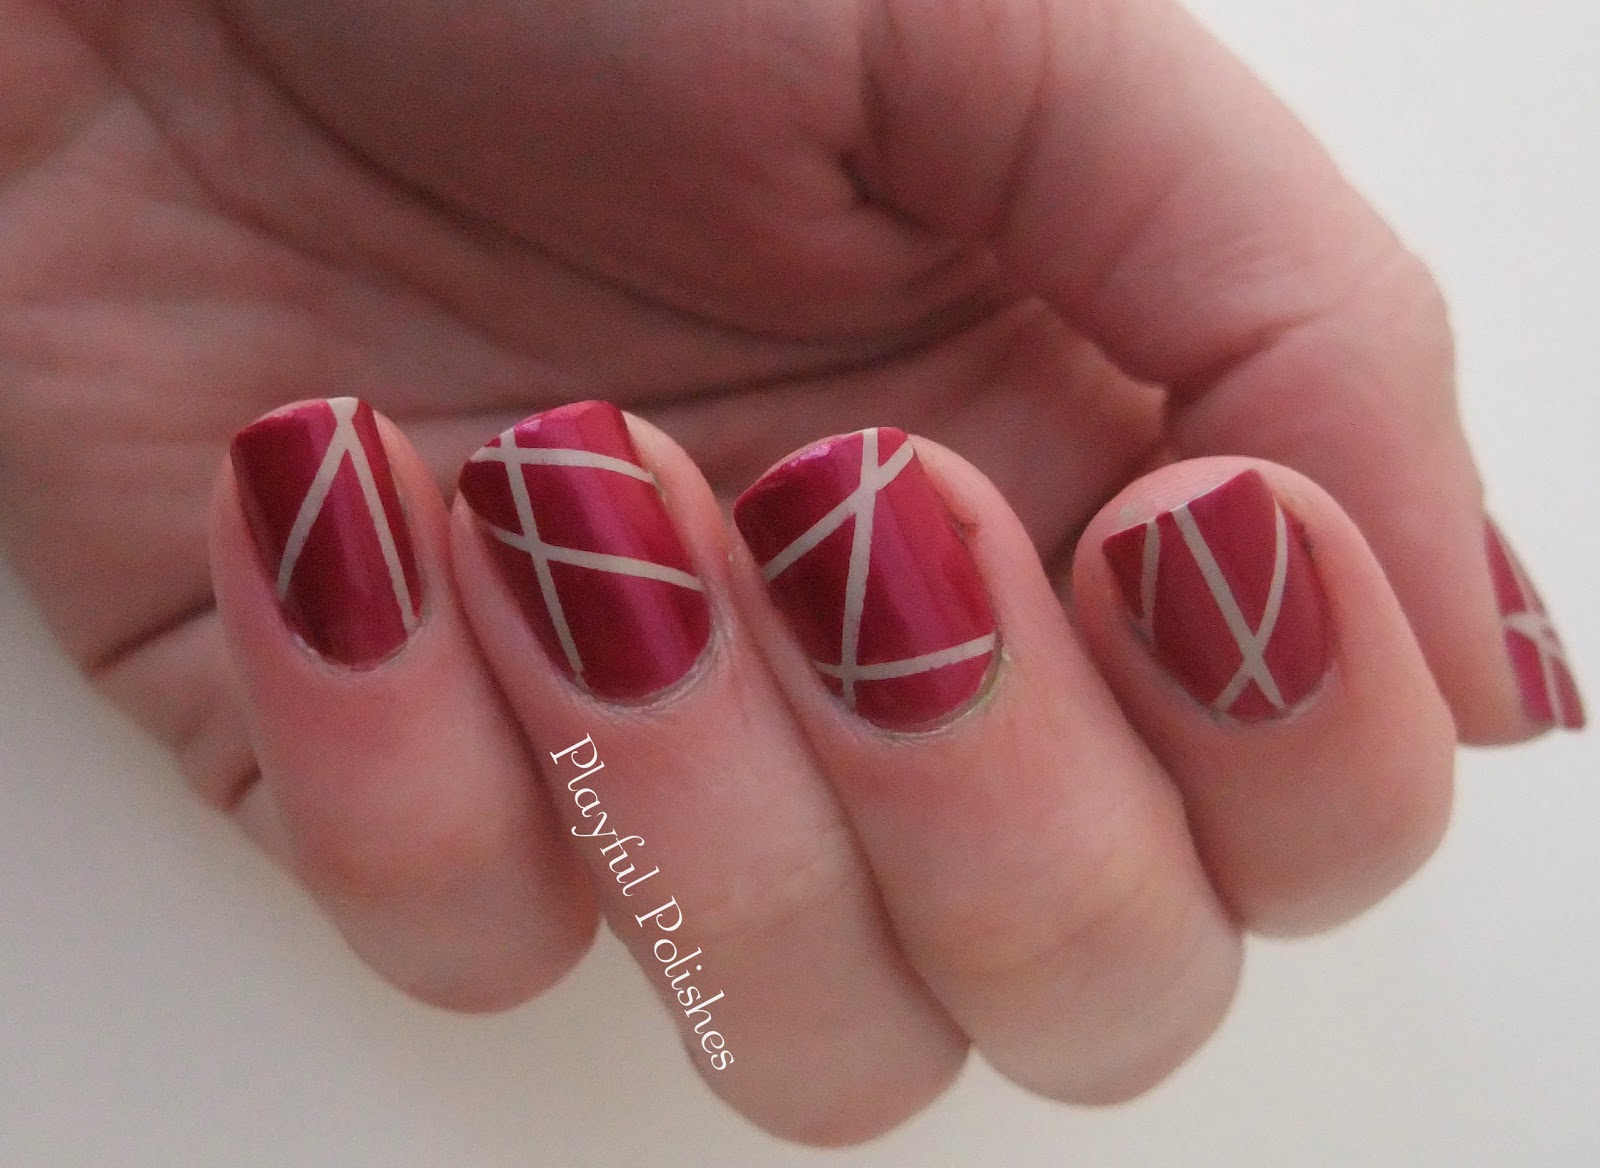 30 Striped Nail Designs and Ideas That'll Get You Noticed - wide 4